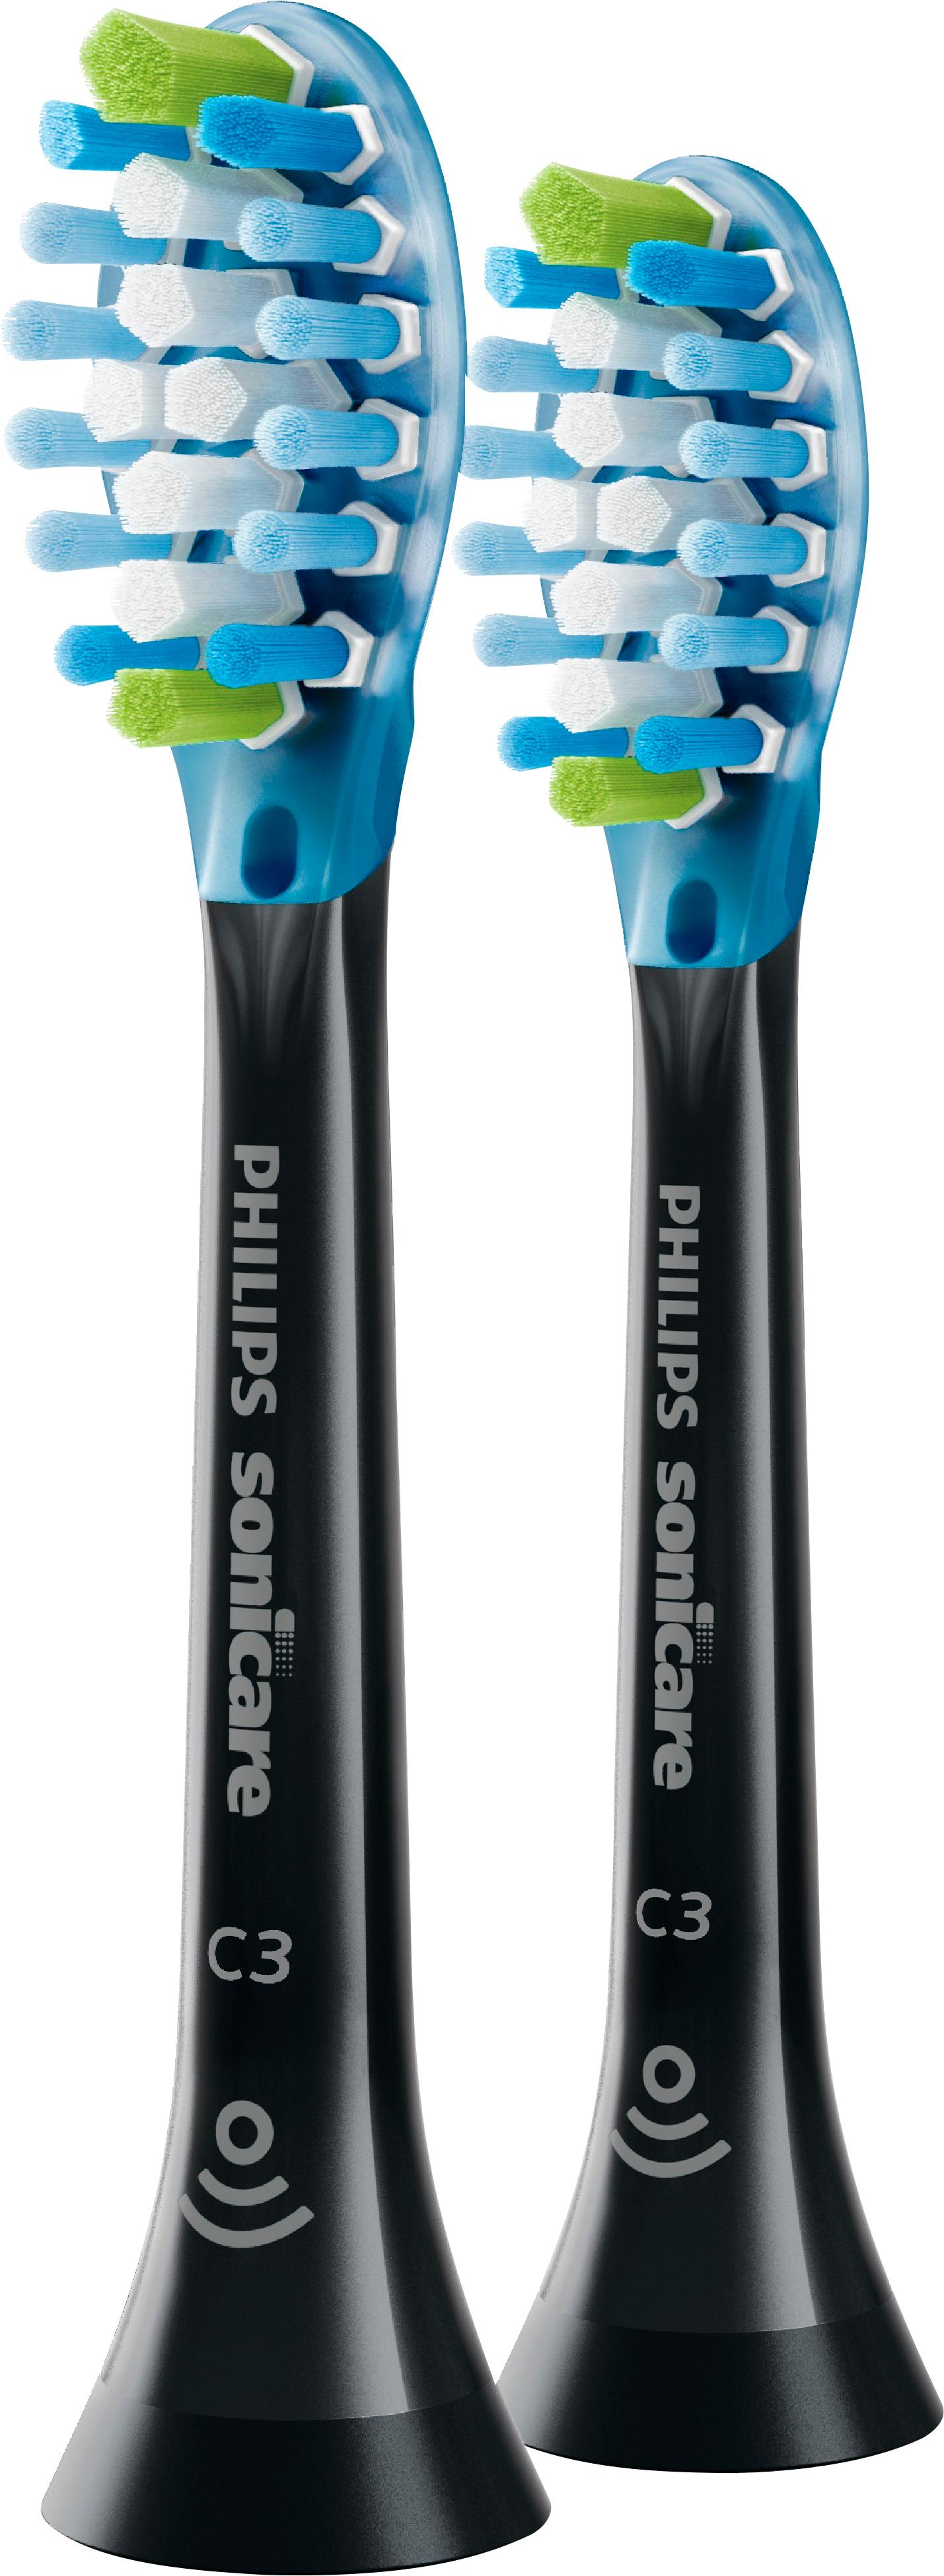 Angle View: Philips Sonicare - Premium Plaque Control Brush Heads (2-Pack) - Black